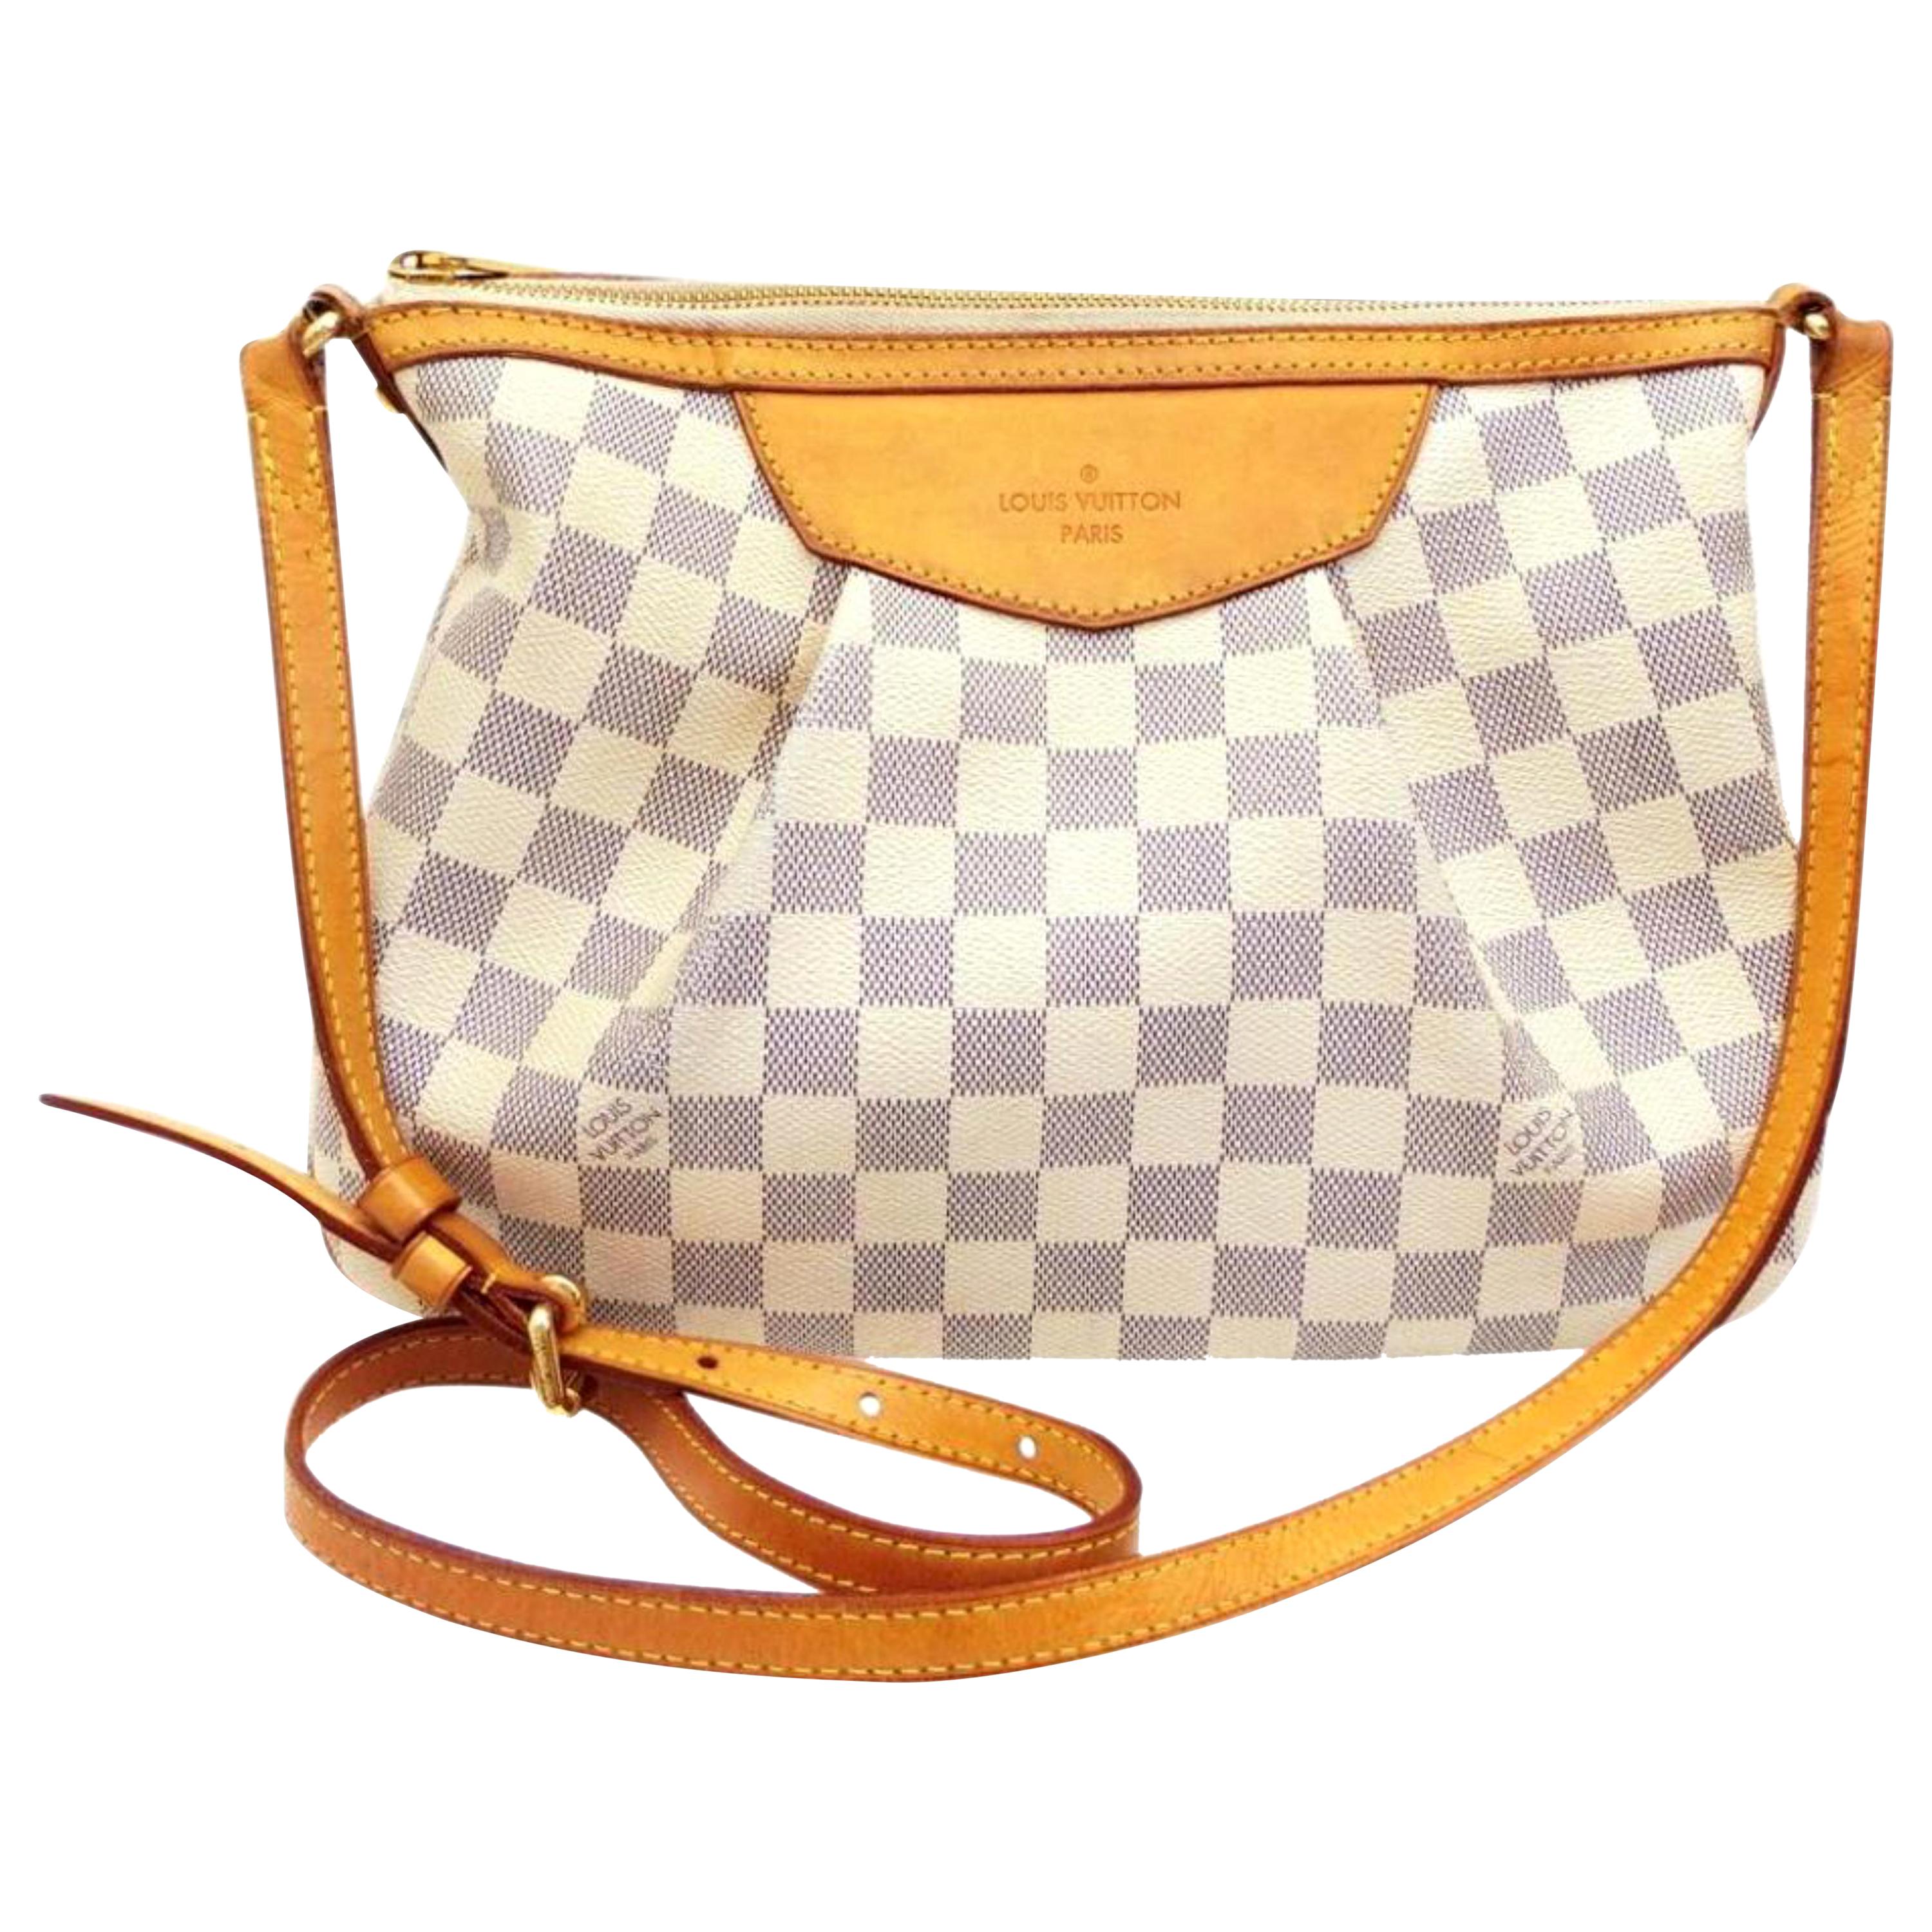 Louis Vuitton Siracusa Damier Azur Pm 234210 White Coated Canvas Cross Body Bag For Sale